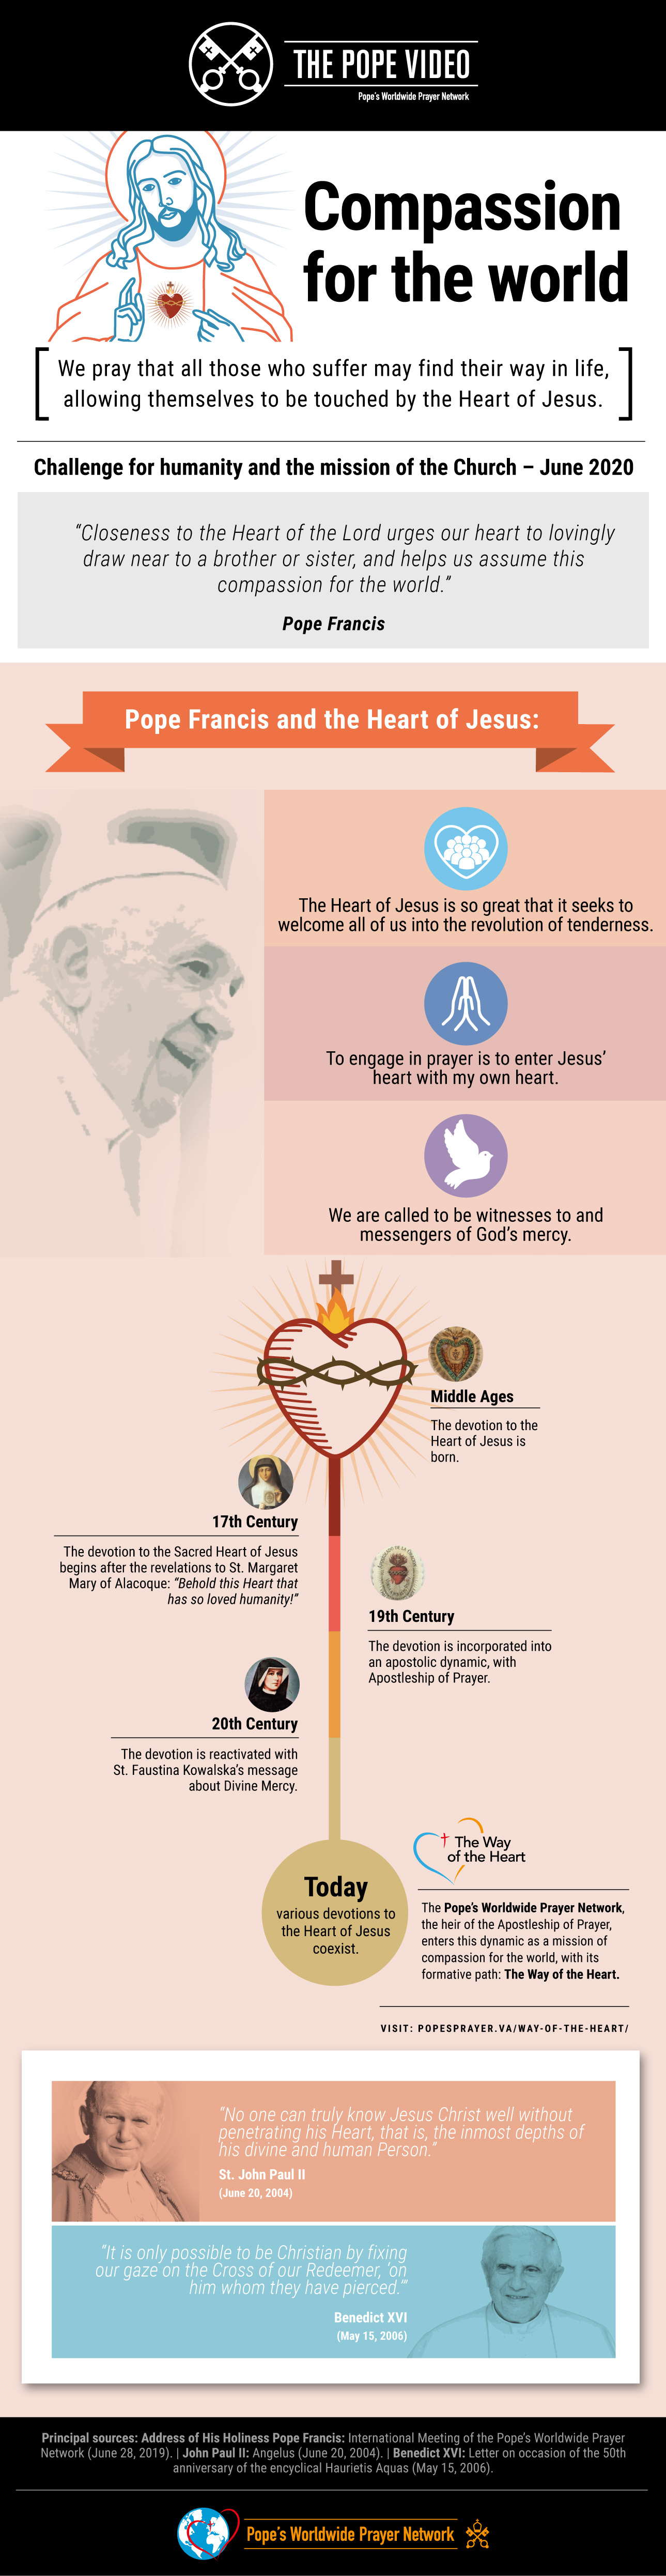 infographic-tpv-6-2020-en-the-pope-video-compassion-for-the-world-1.jpg